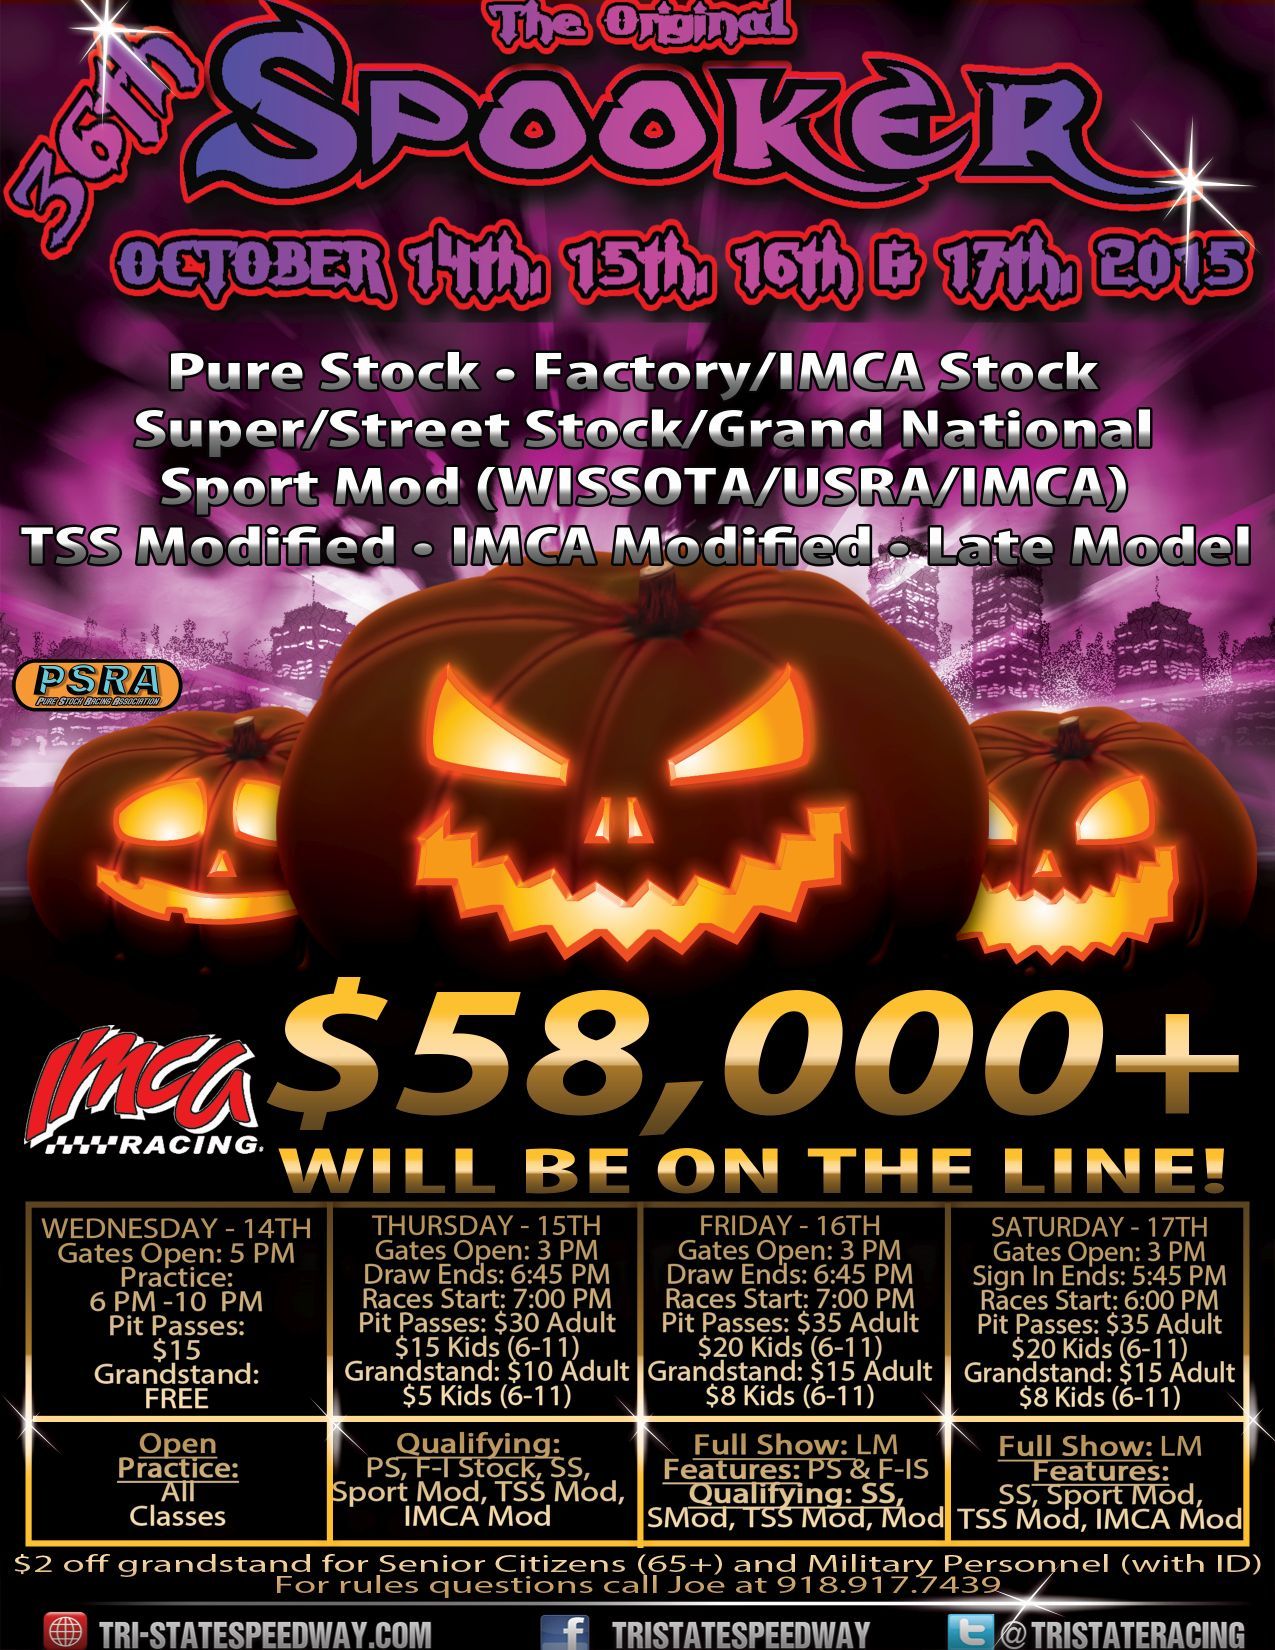 36th Annual Spooker flyer - FRONT